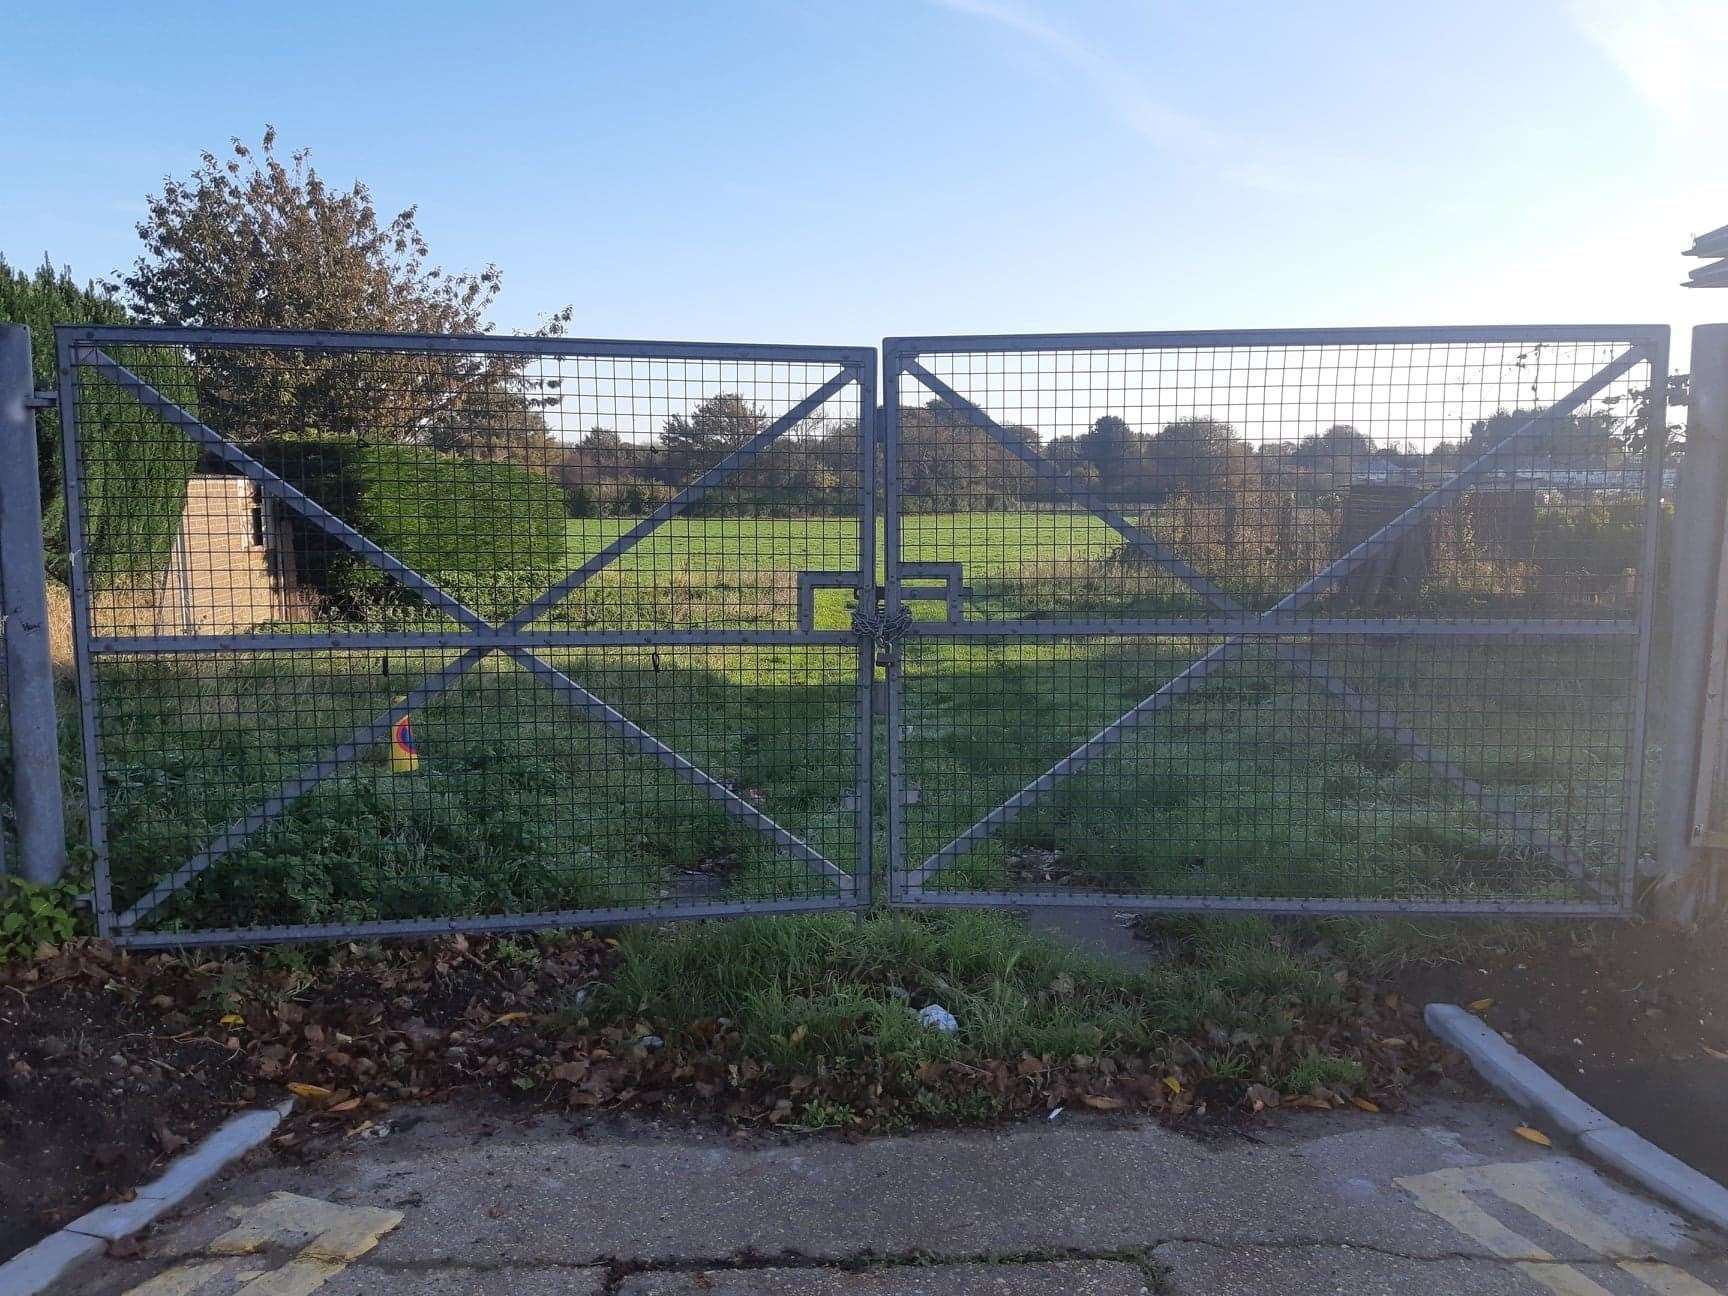 Deal Town Council fears the access is too narrow onto Freemens Way. Other residents have called for a second access point